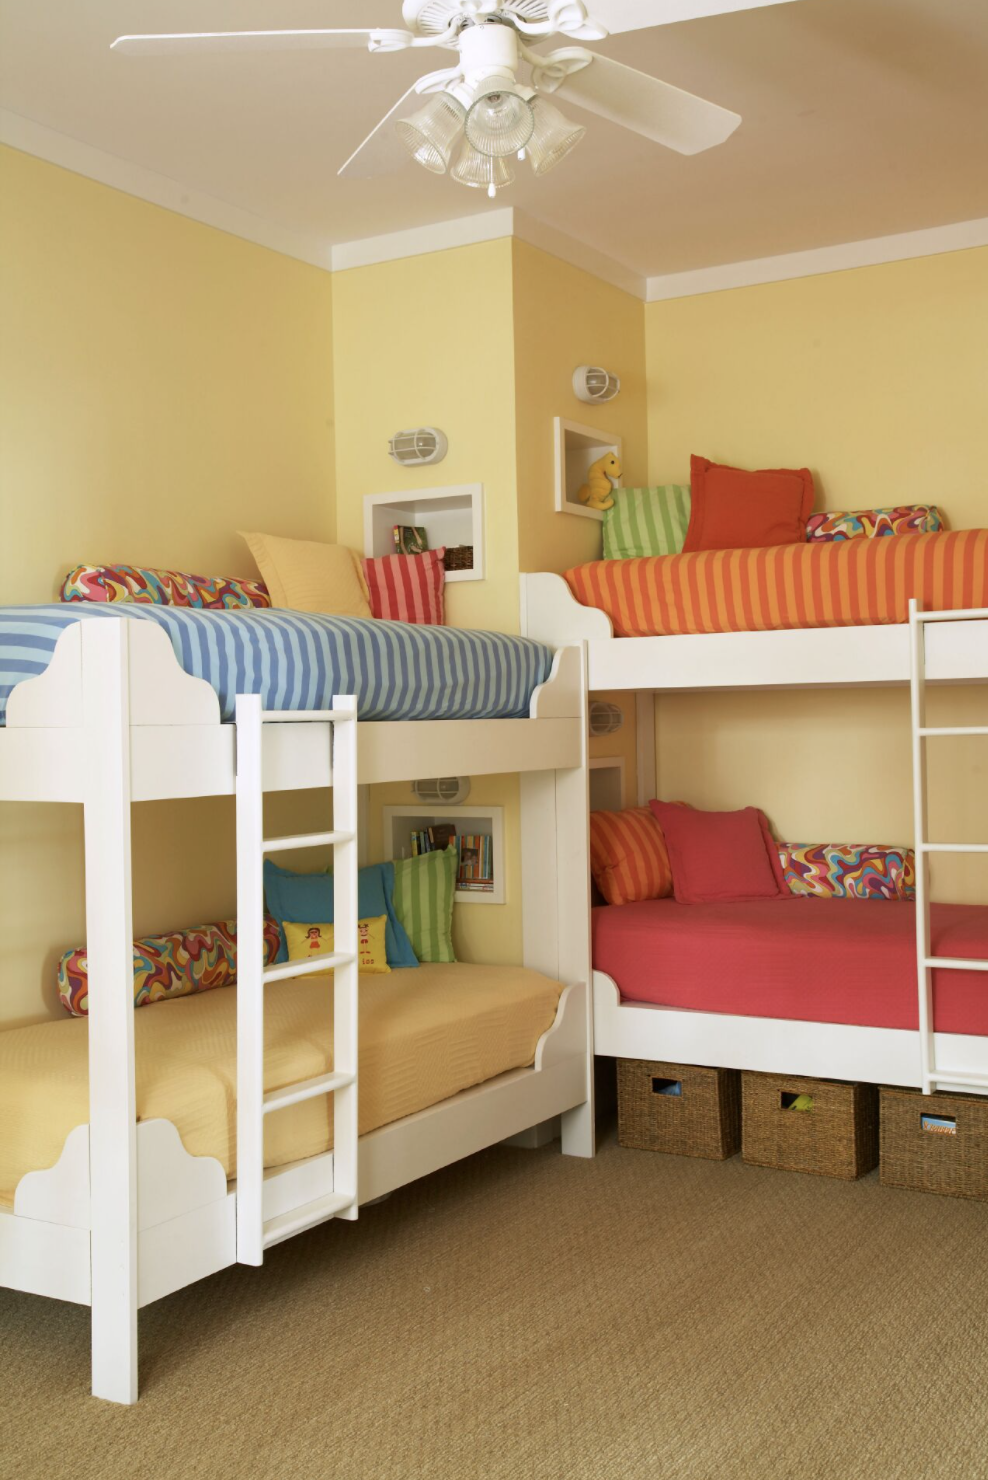 25 Space-Saving Bunk Bed Ideas - Stylish Bunk Beds for Adults and Kids